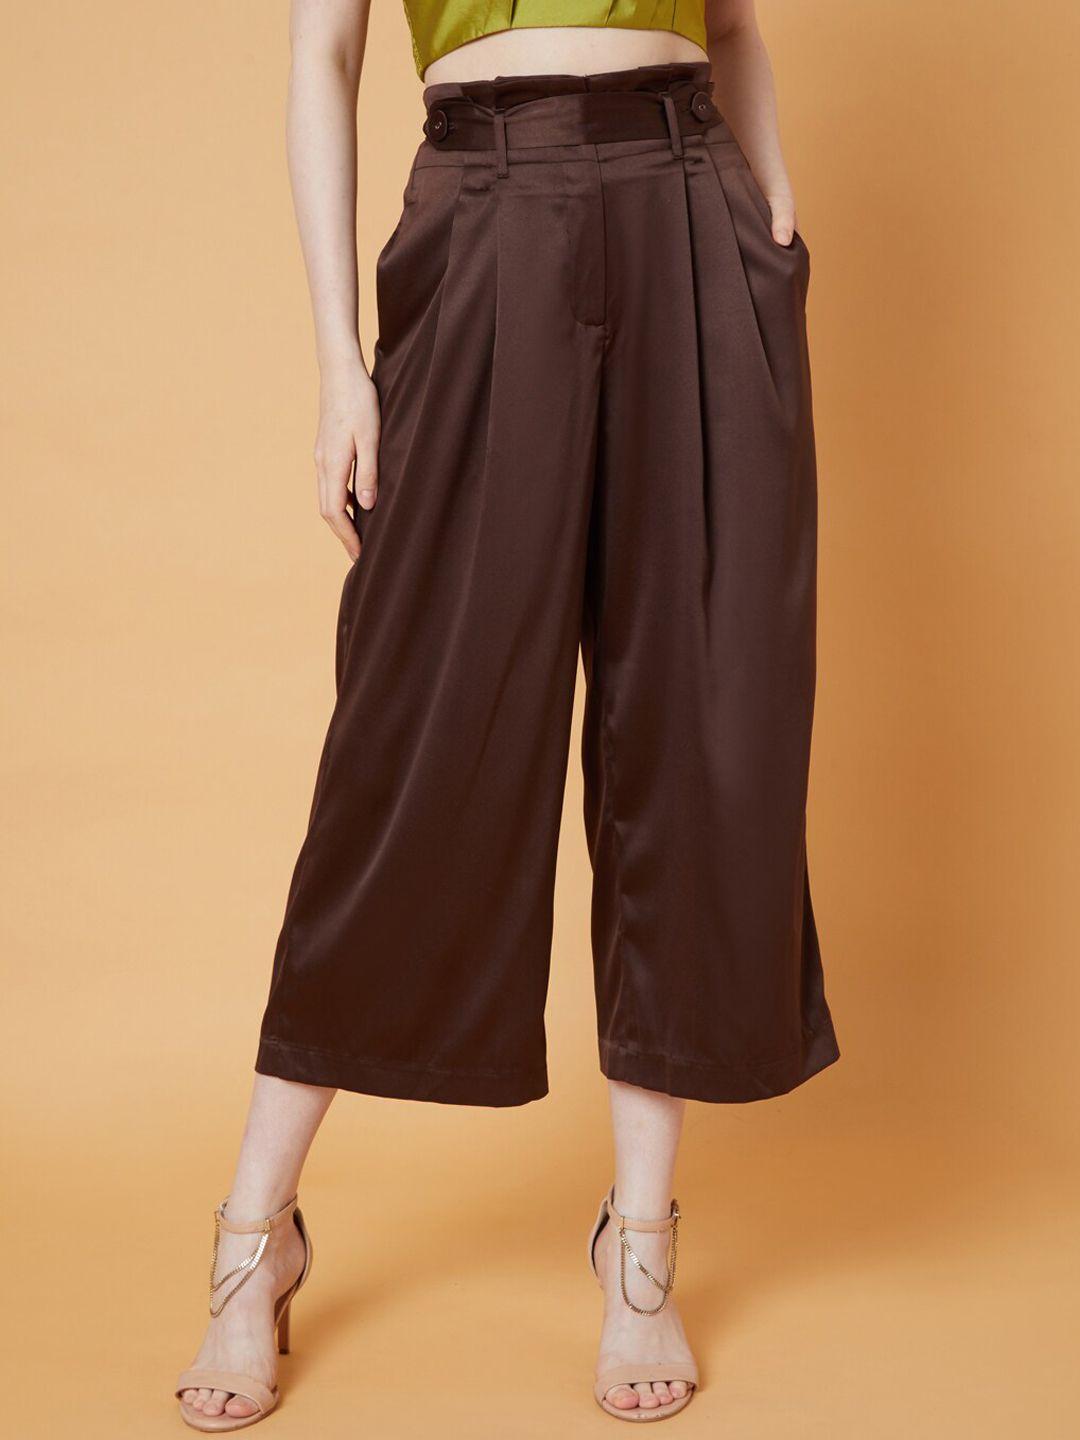 vero moda marquee collection women brown high-rise pleated culottes trousers